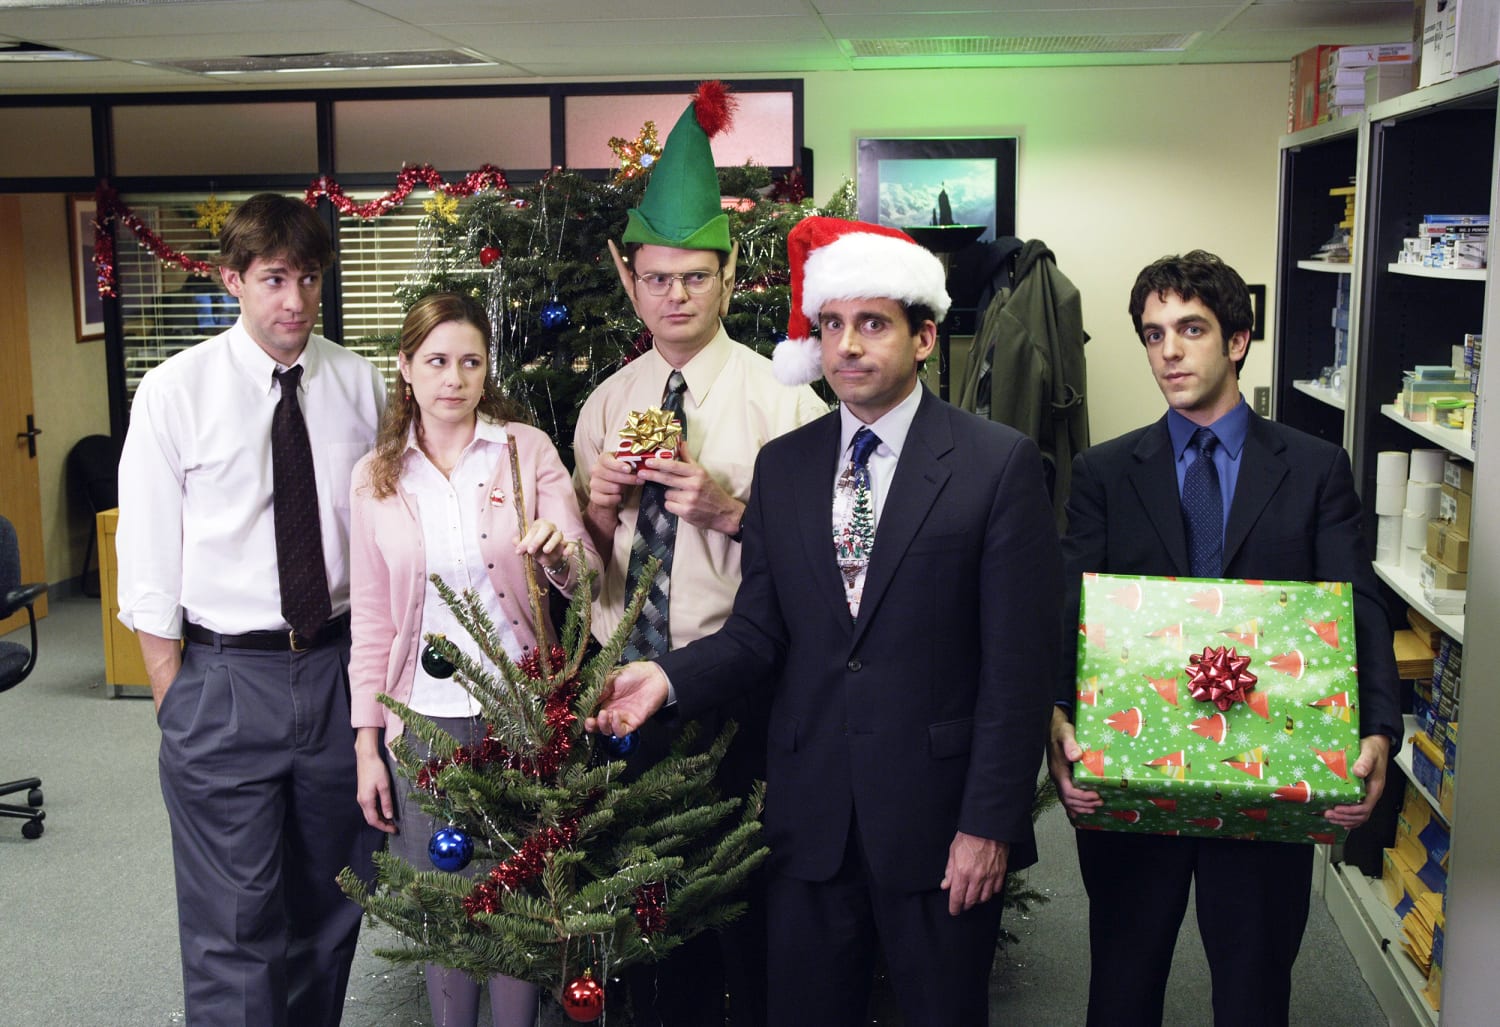 The Office' Christmas Episodes: How to Watch Them in Order